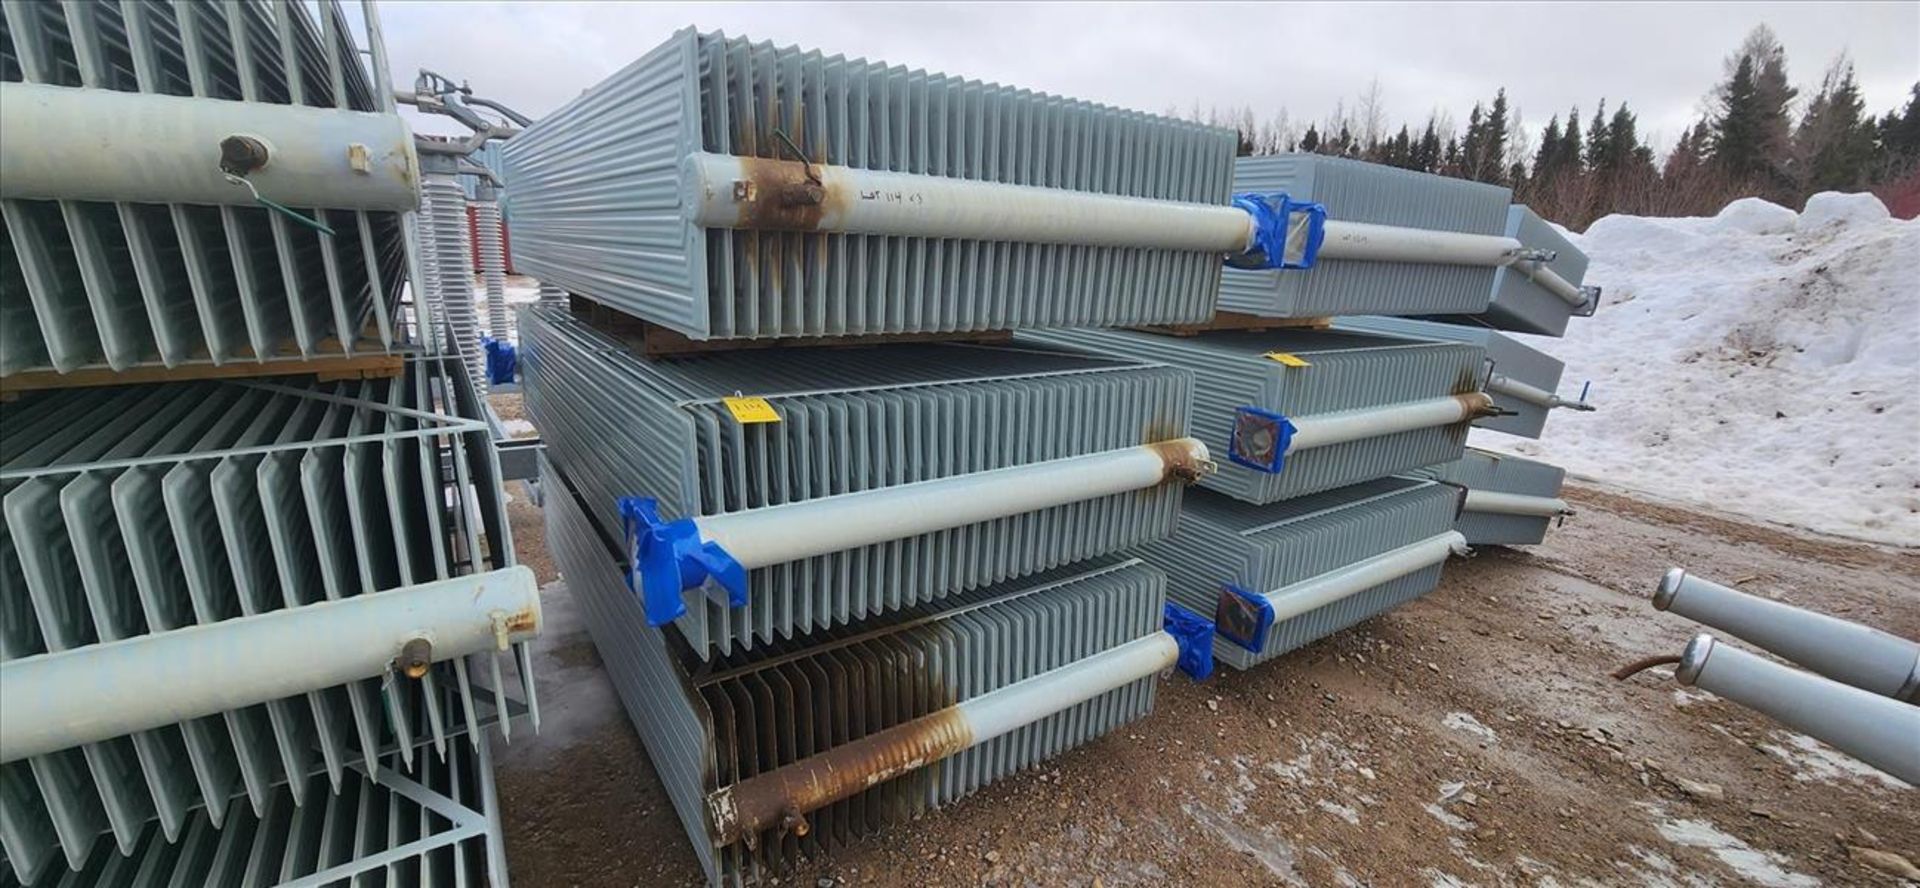 (3) ATP radiators, approx. 20 in. x 101 in. x 57 in. height (Asset Location: Hallnor Yard) {Day